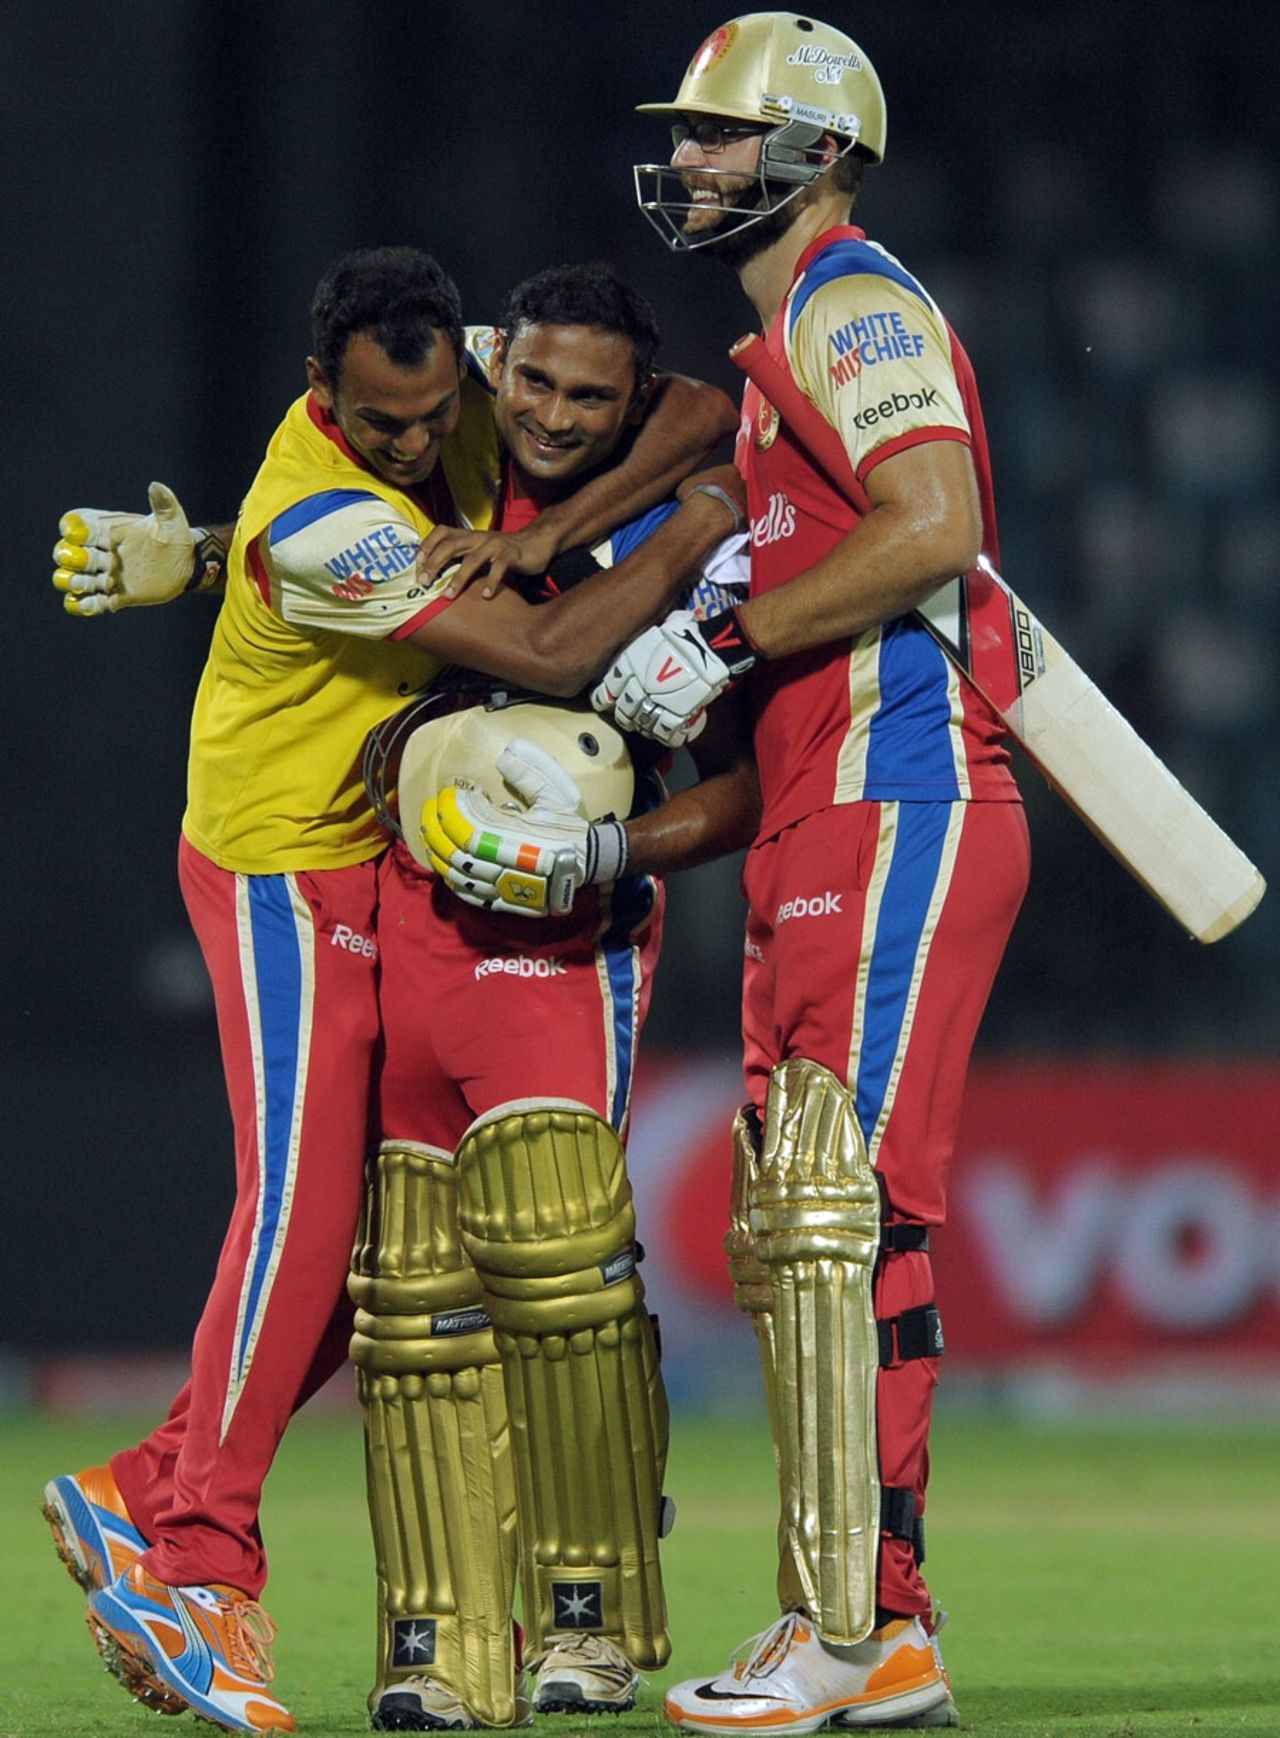 J Syed Mohammad is congratulated after he hit the winning runs, Delhi Daredevils v Royal Challengers Bangalore, IPL 2011, Delhi, April 26, 2011